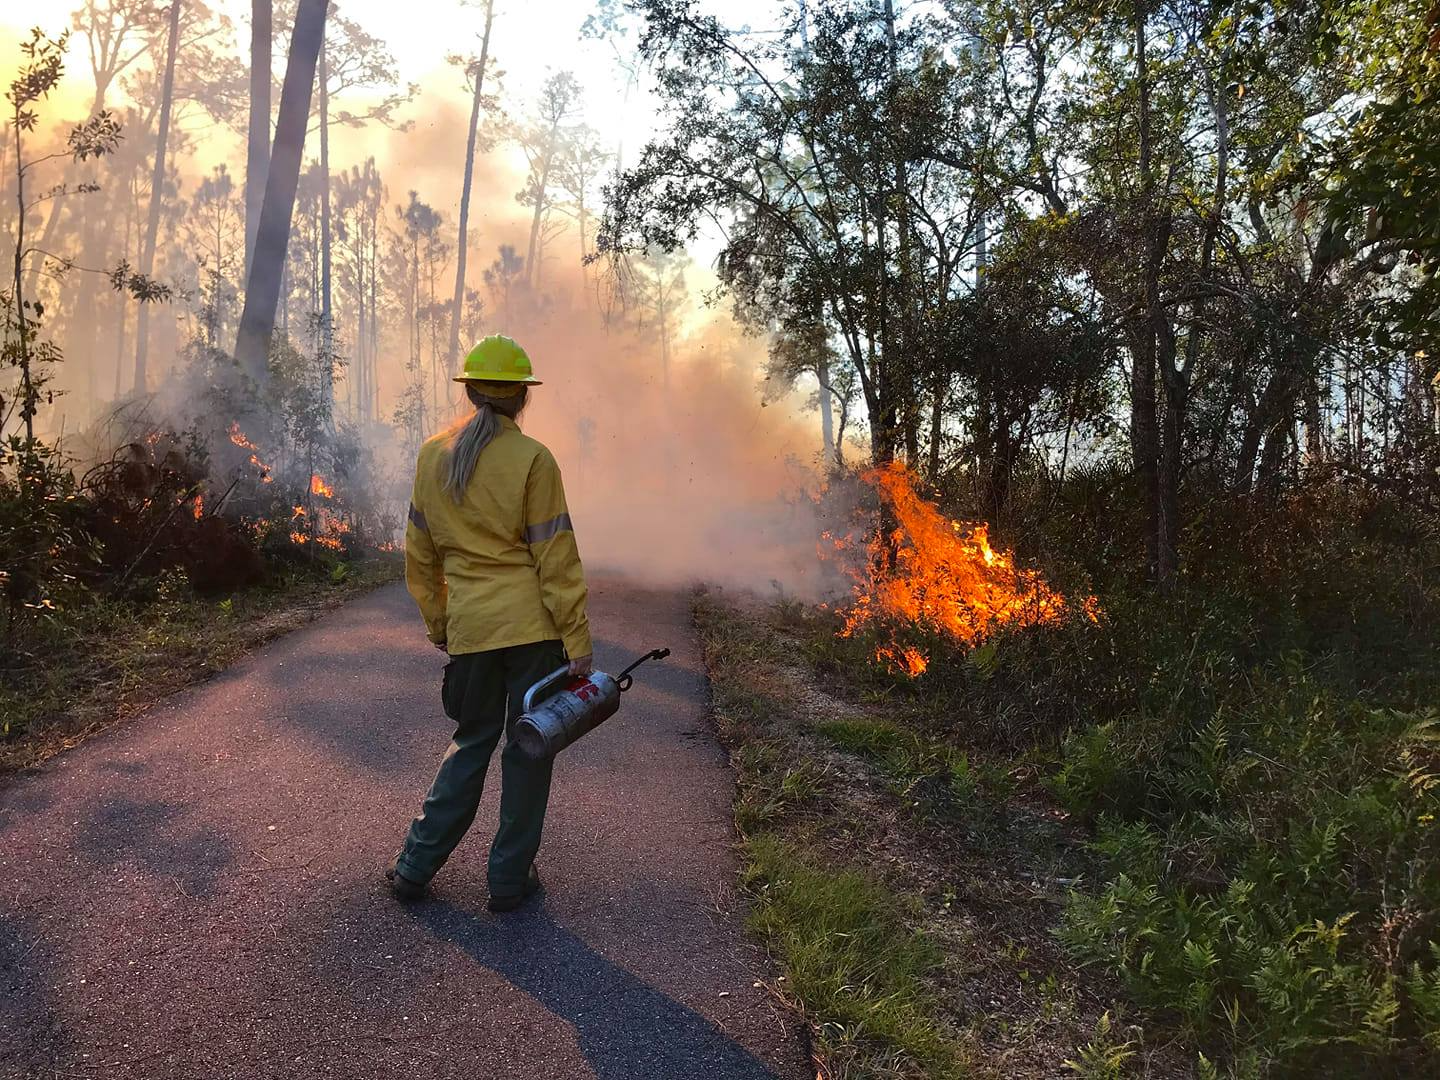 Tasha Simon, Chief of the Natural Resources Section for ADCNR's State Parks Division, assisting with a prescribed fire at Gulf State Park.